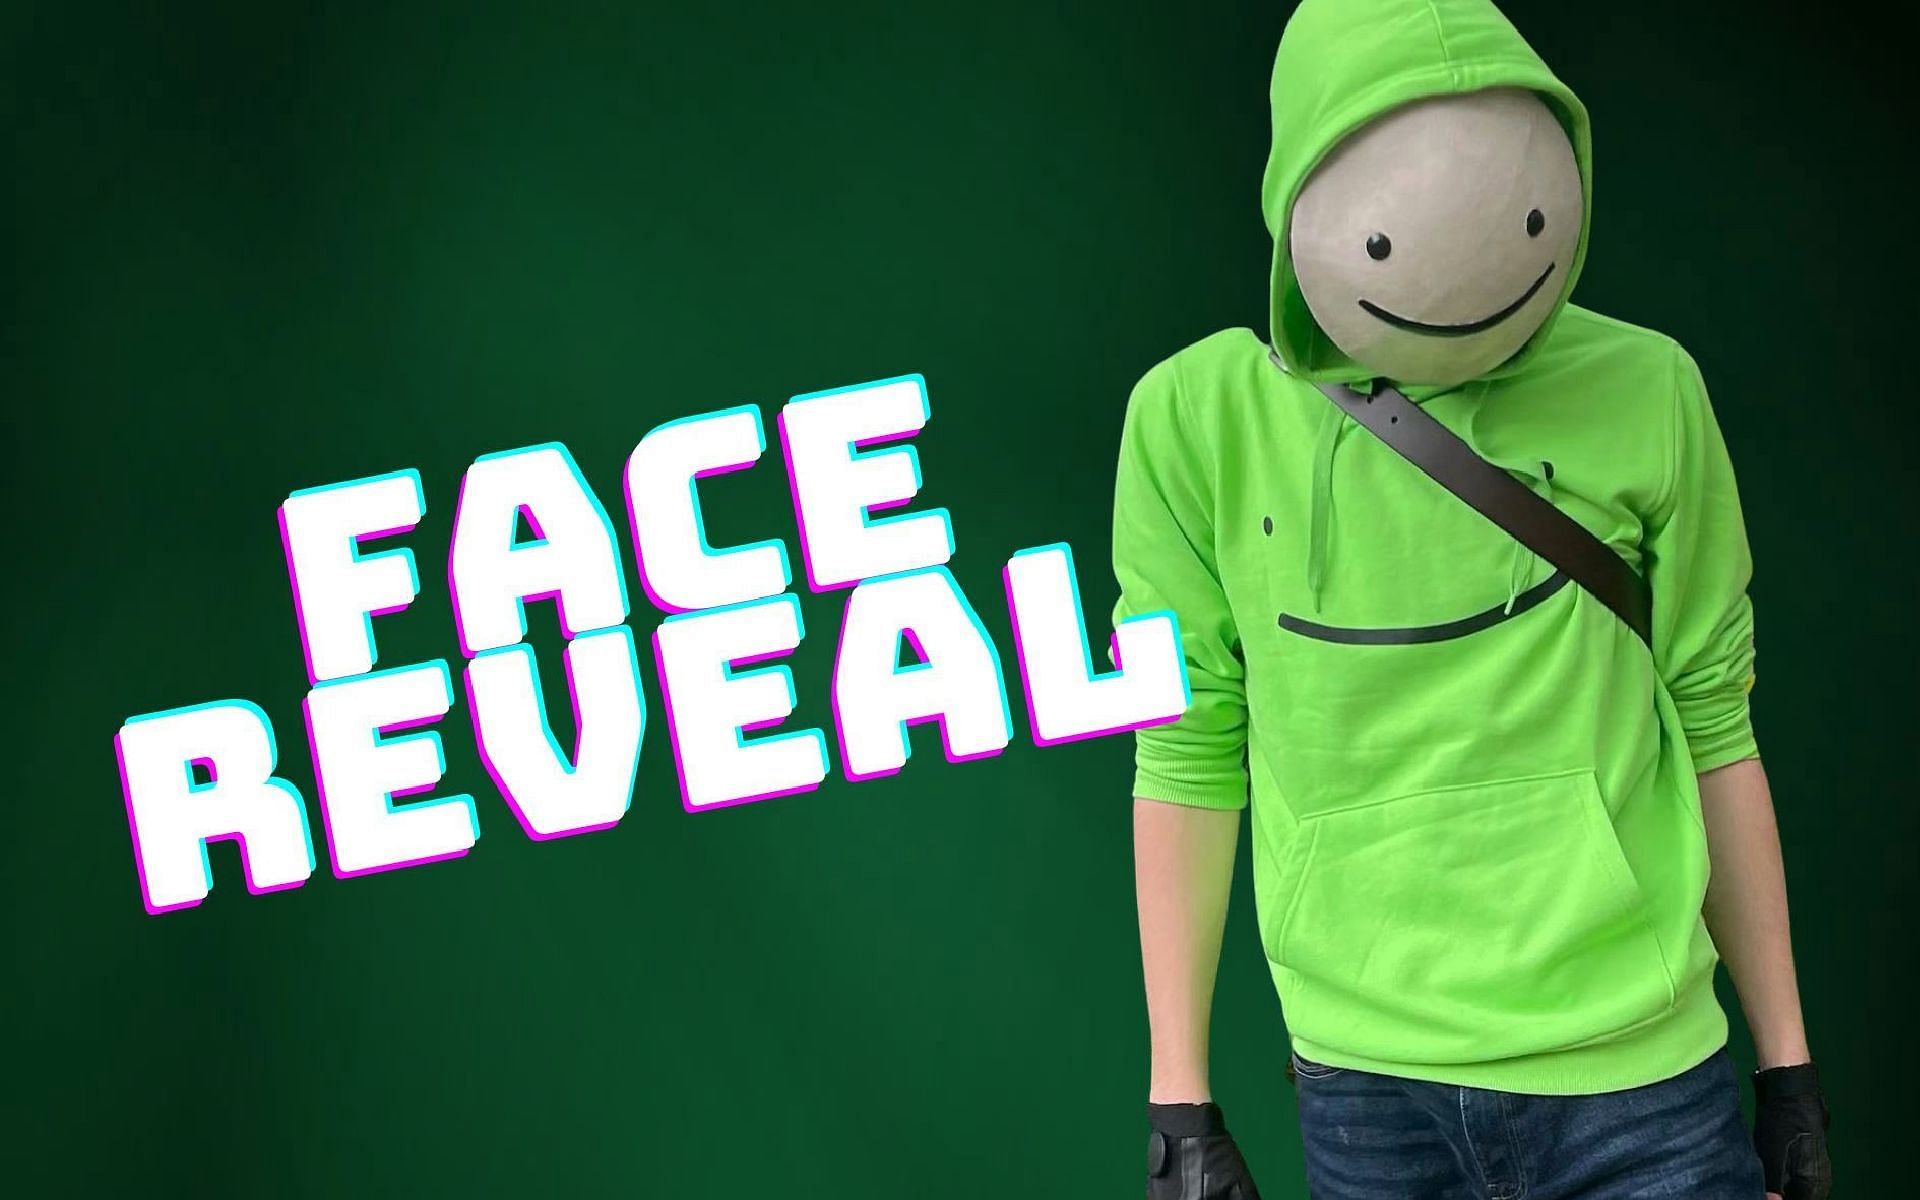 Dream’s face reveal today When can fans expect Minecraft star to